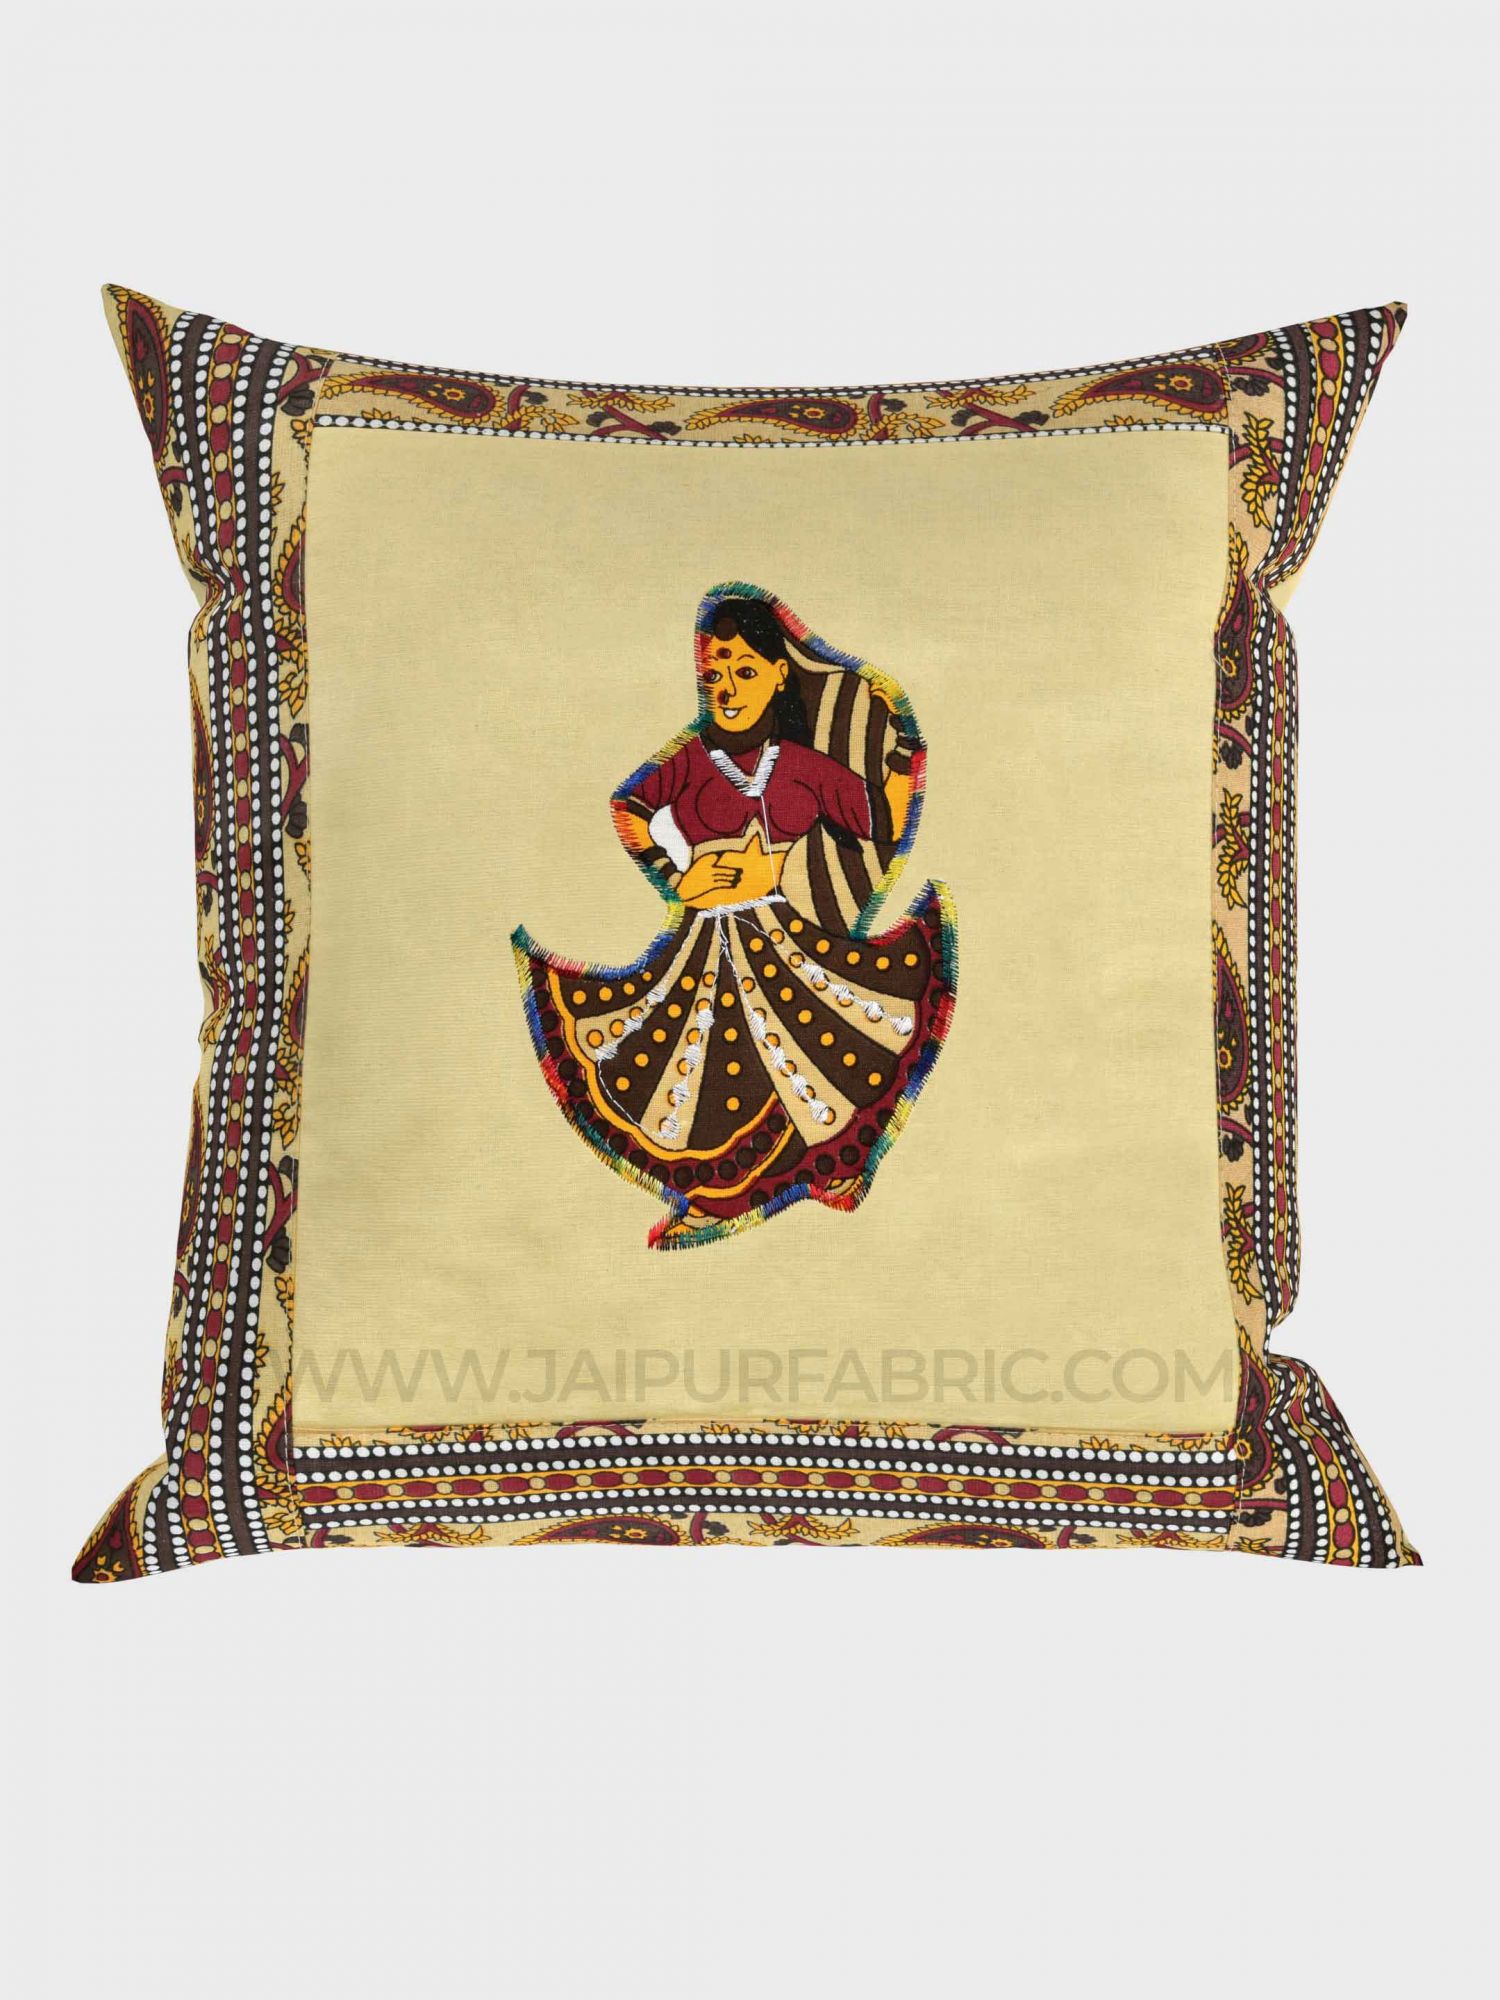 Applique Cream Rajasthani Dance Jaipuri Hand Made Embroidery Patch Work Cushion Cover